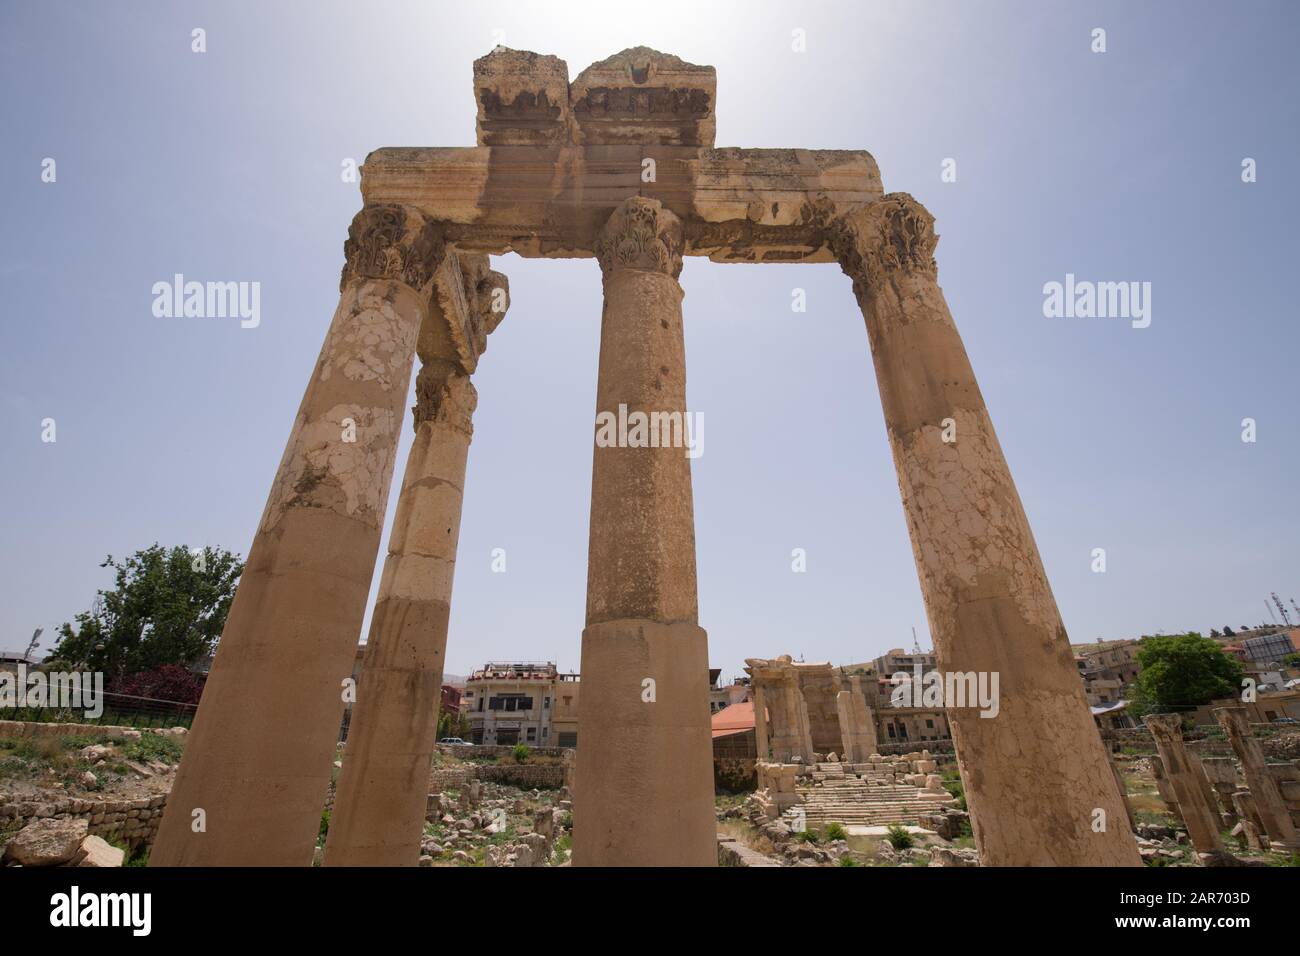 Colonnaded street. The ruins of the Roman city of Heliopolis or Baalbek in the Beqaa Valley. Baalbek, Lebanon - June, 2019 Stock Photo